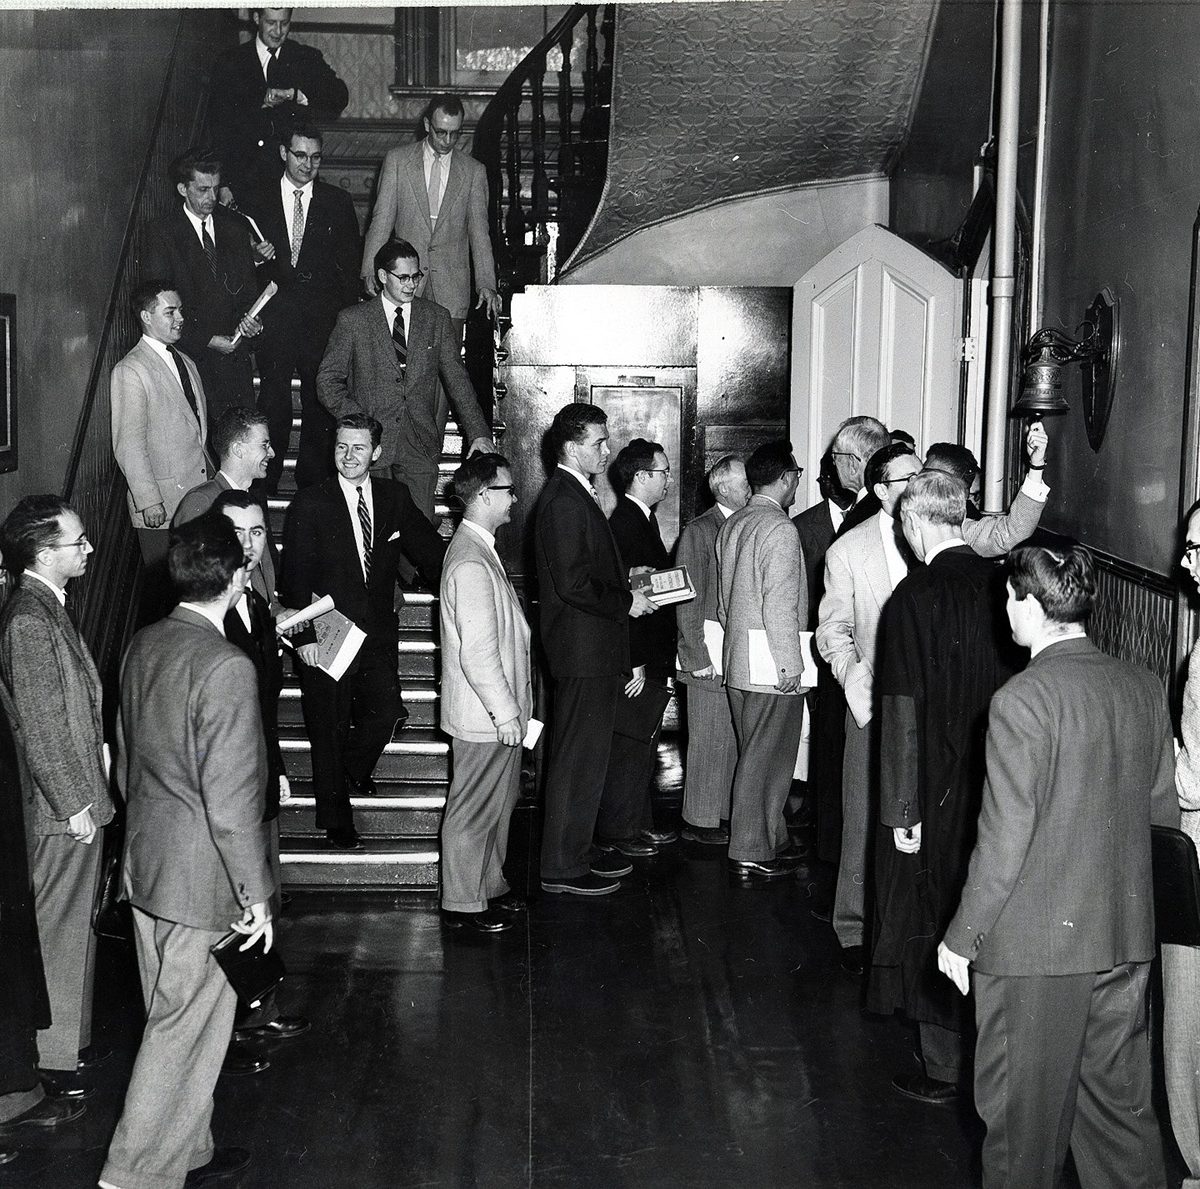 Students waiting for class in the old building